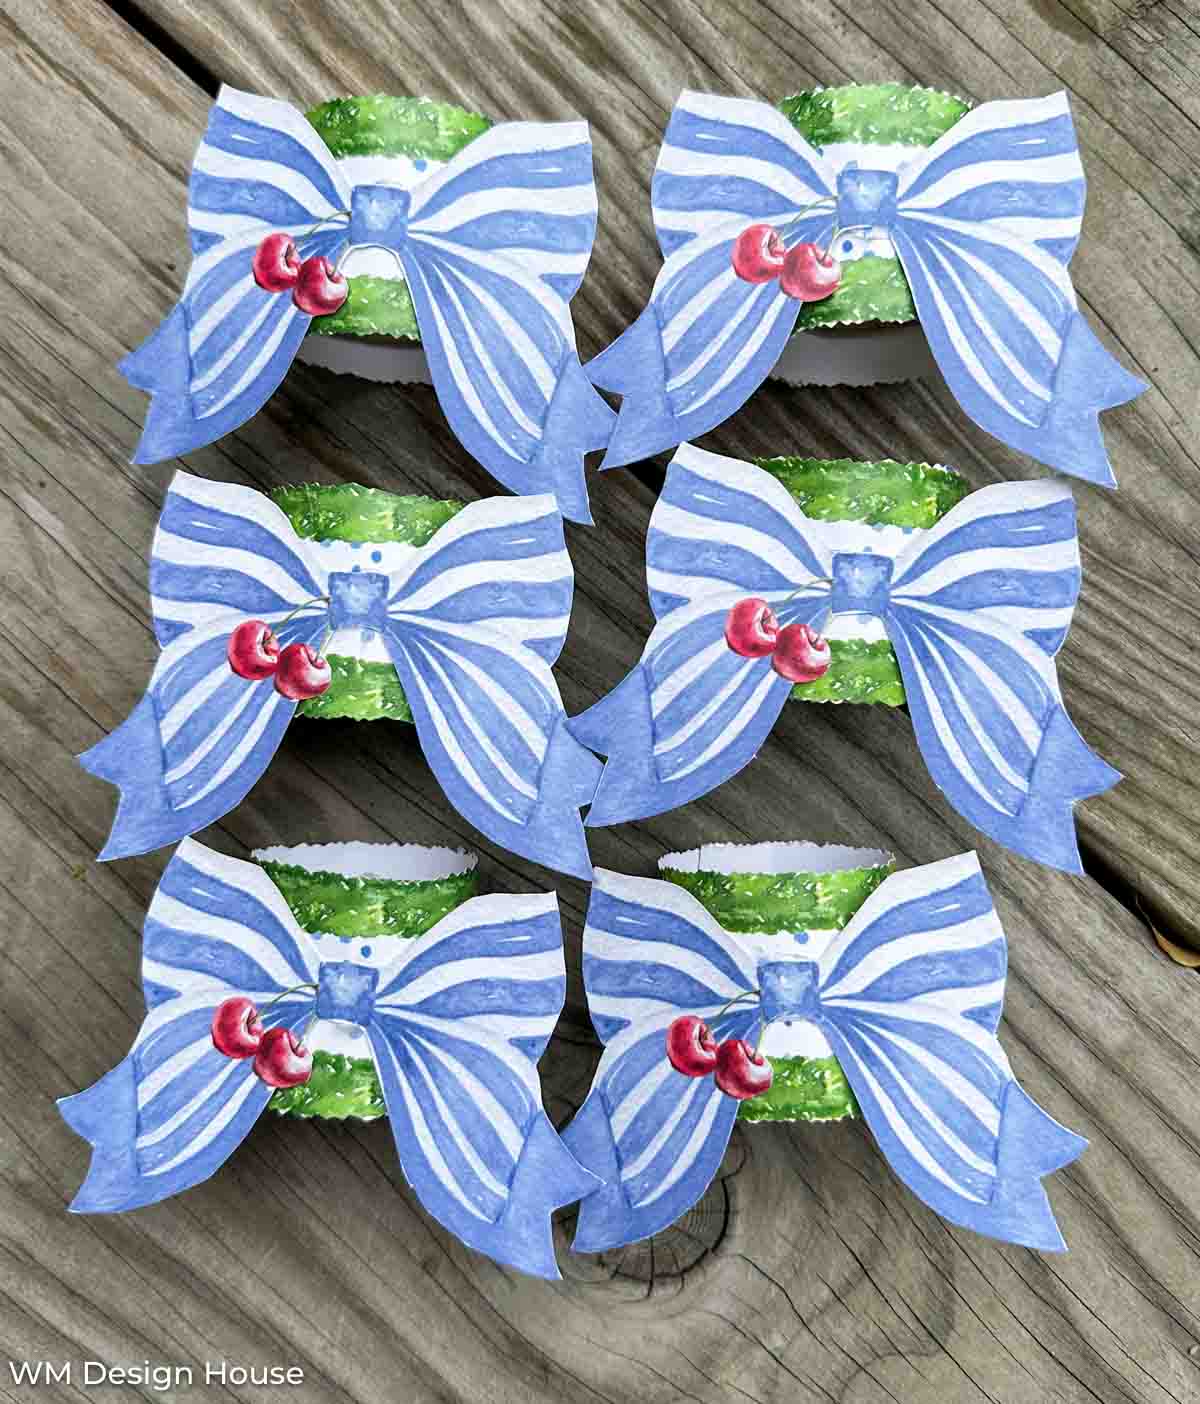 Napkin rings custom made by wendy with a blue and white stripe bow